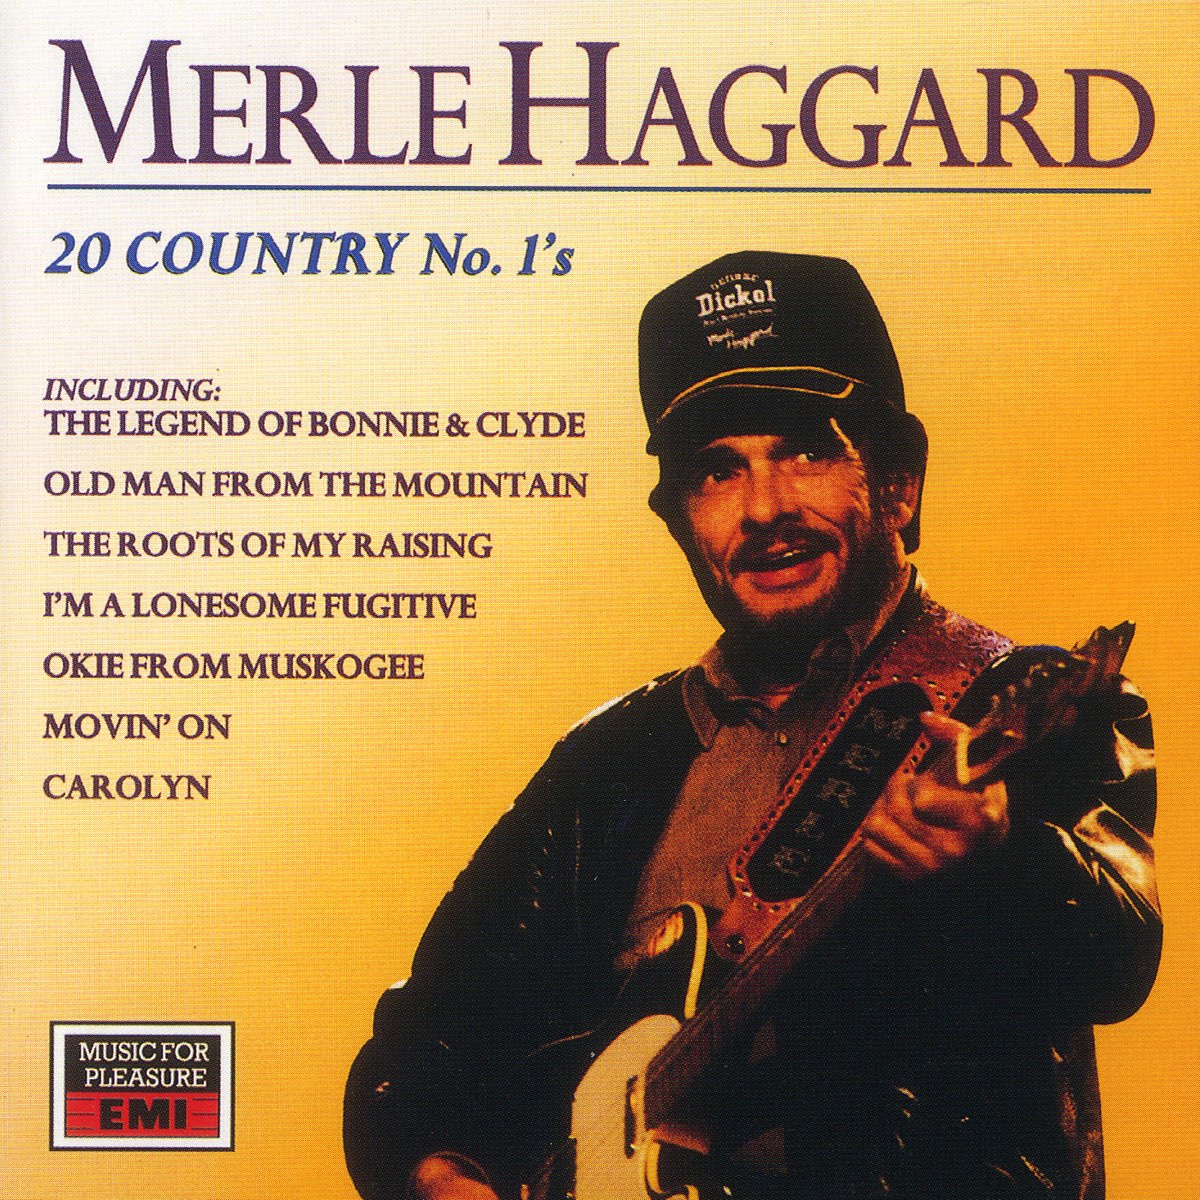 ‎20 Country No. 1's - Album by Merle Haggard - Apple Music